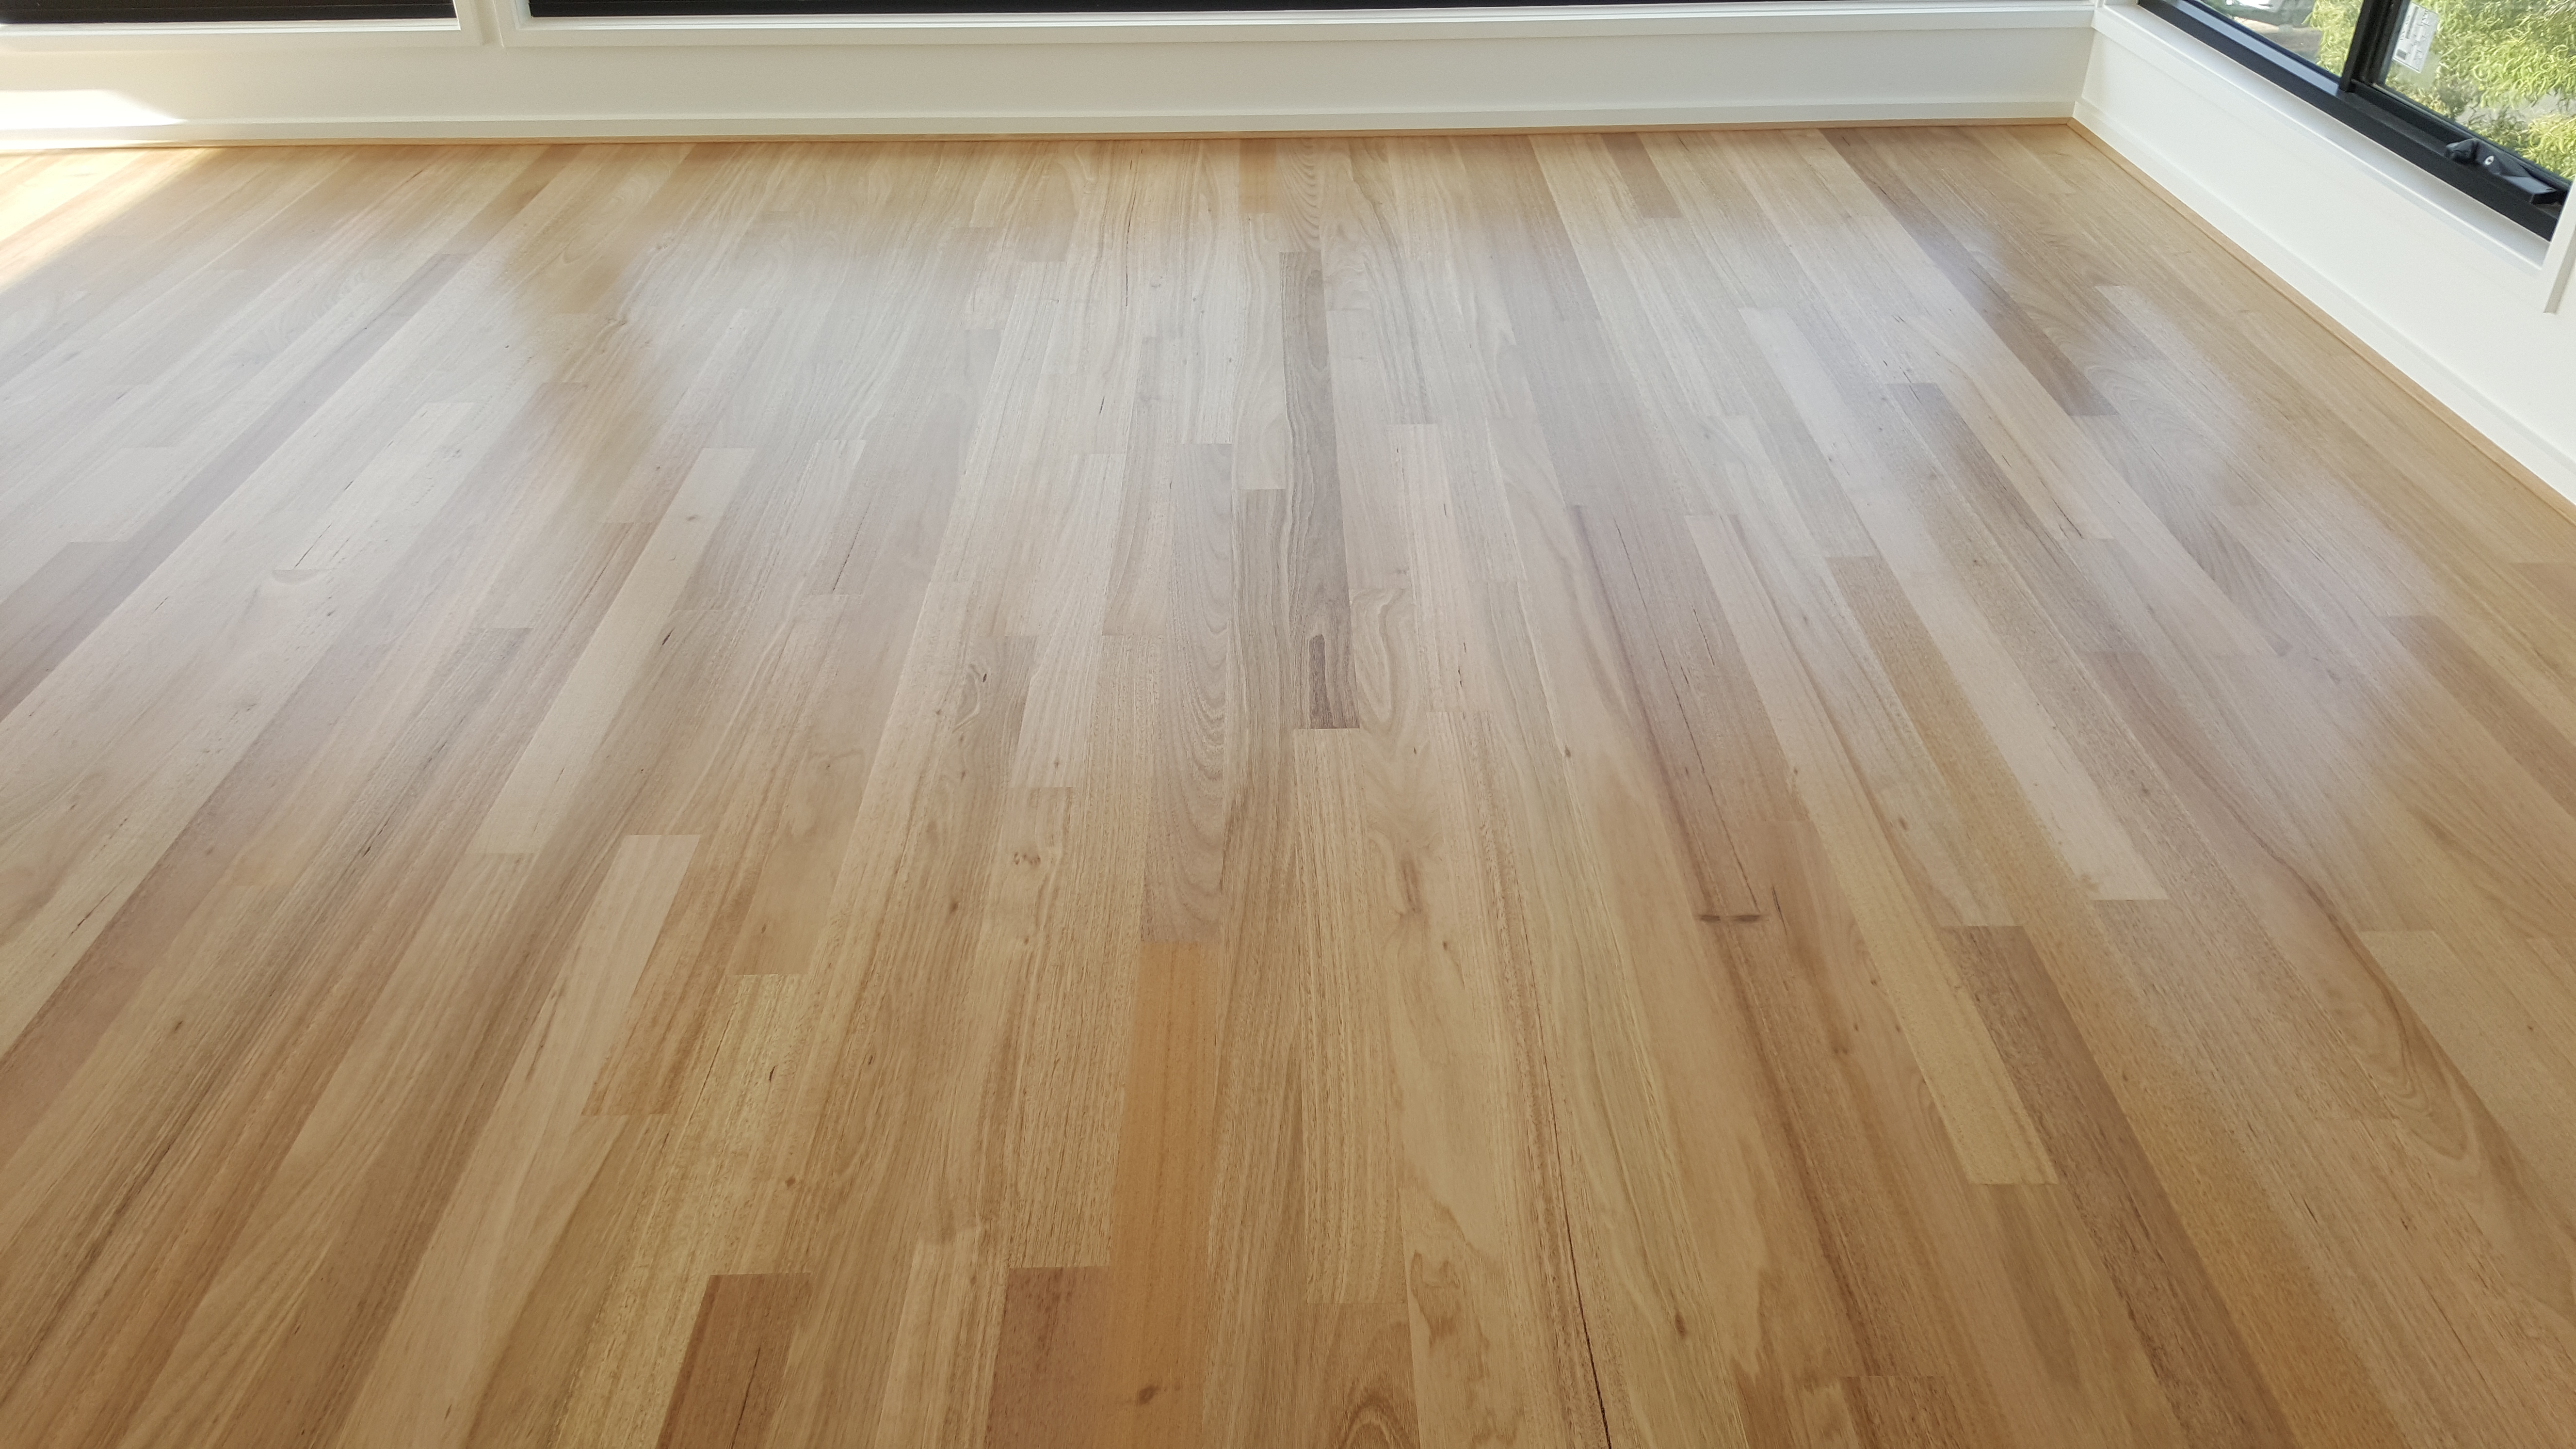 About Superbly Polished Floor